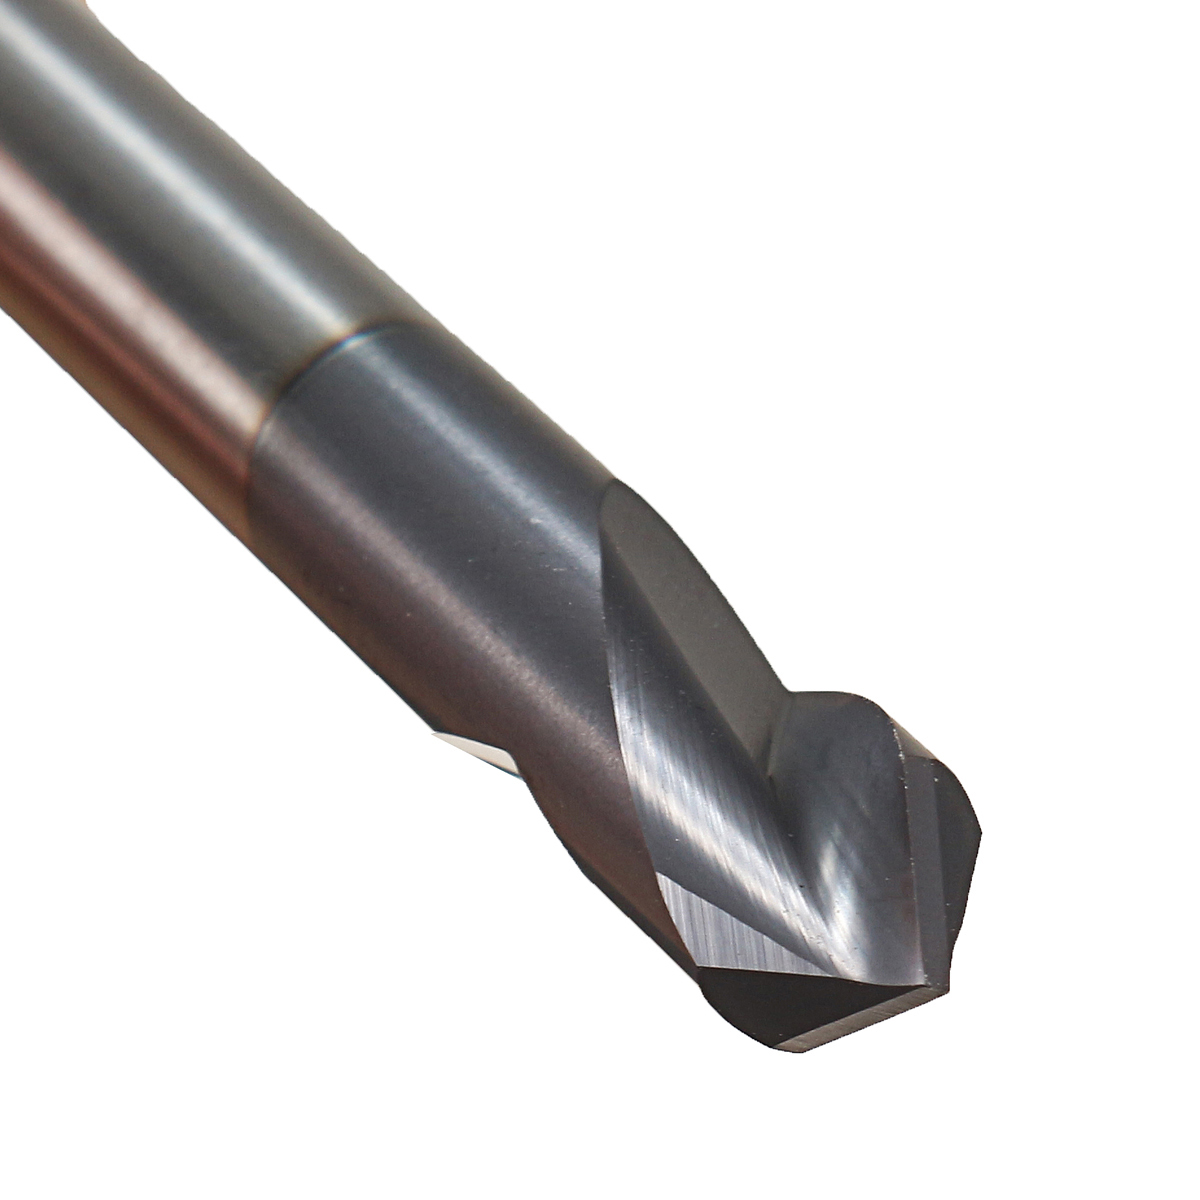 Drillpro-2-Flutes-6mm-Carbide-Chamfer-Mill-90-Degree-HRC45-Milling-Cutter-1108522-6